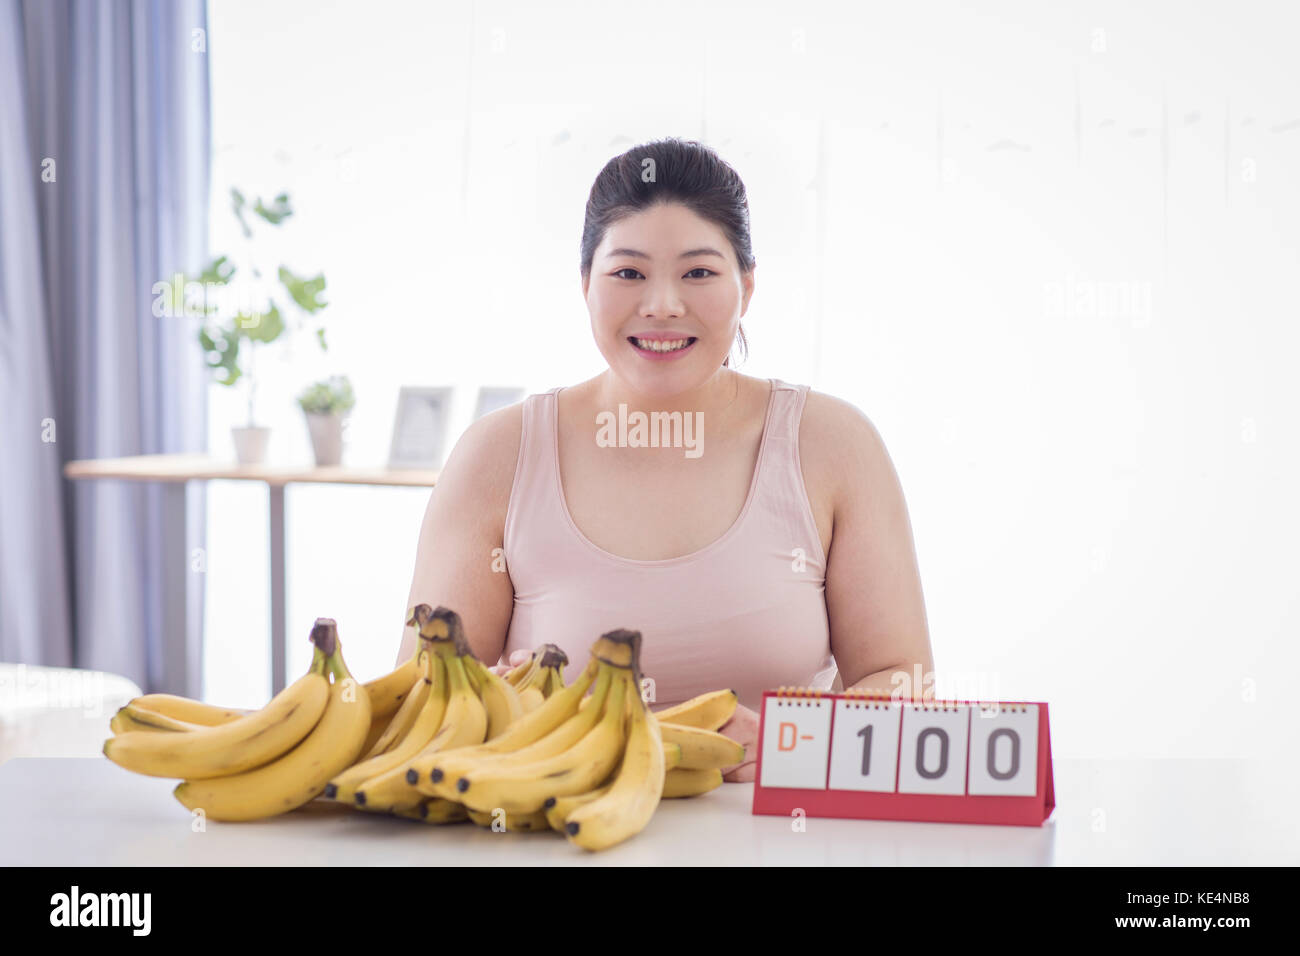 Portrait of young smiling fat woman making diet plan with bananas Stock Photo